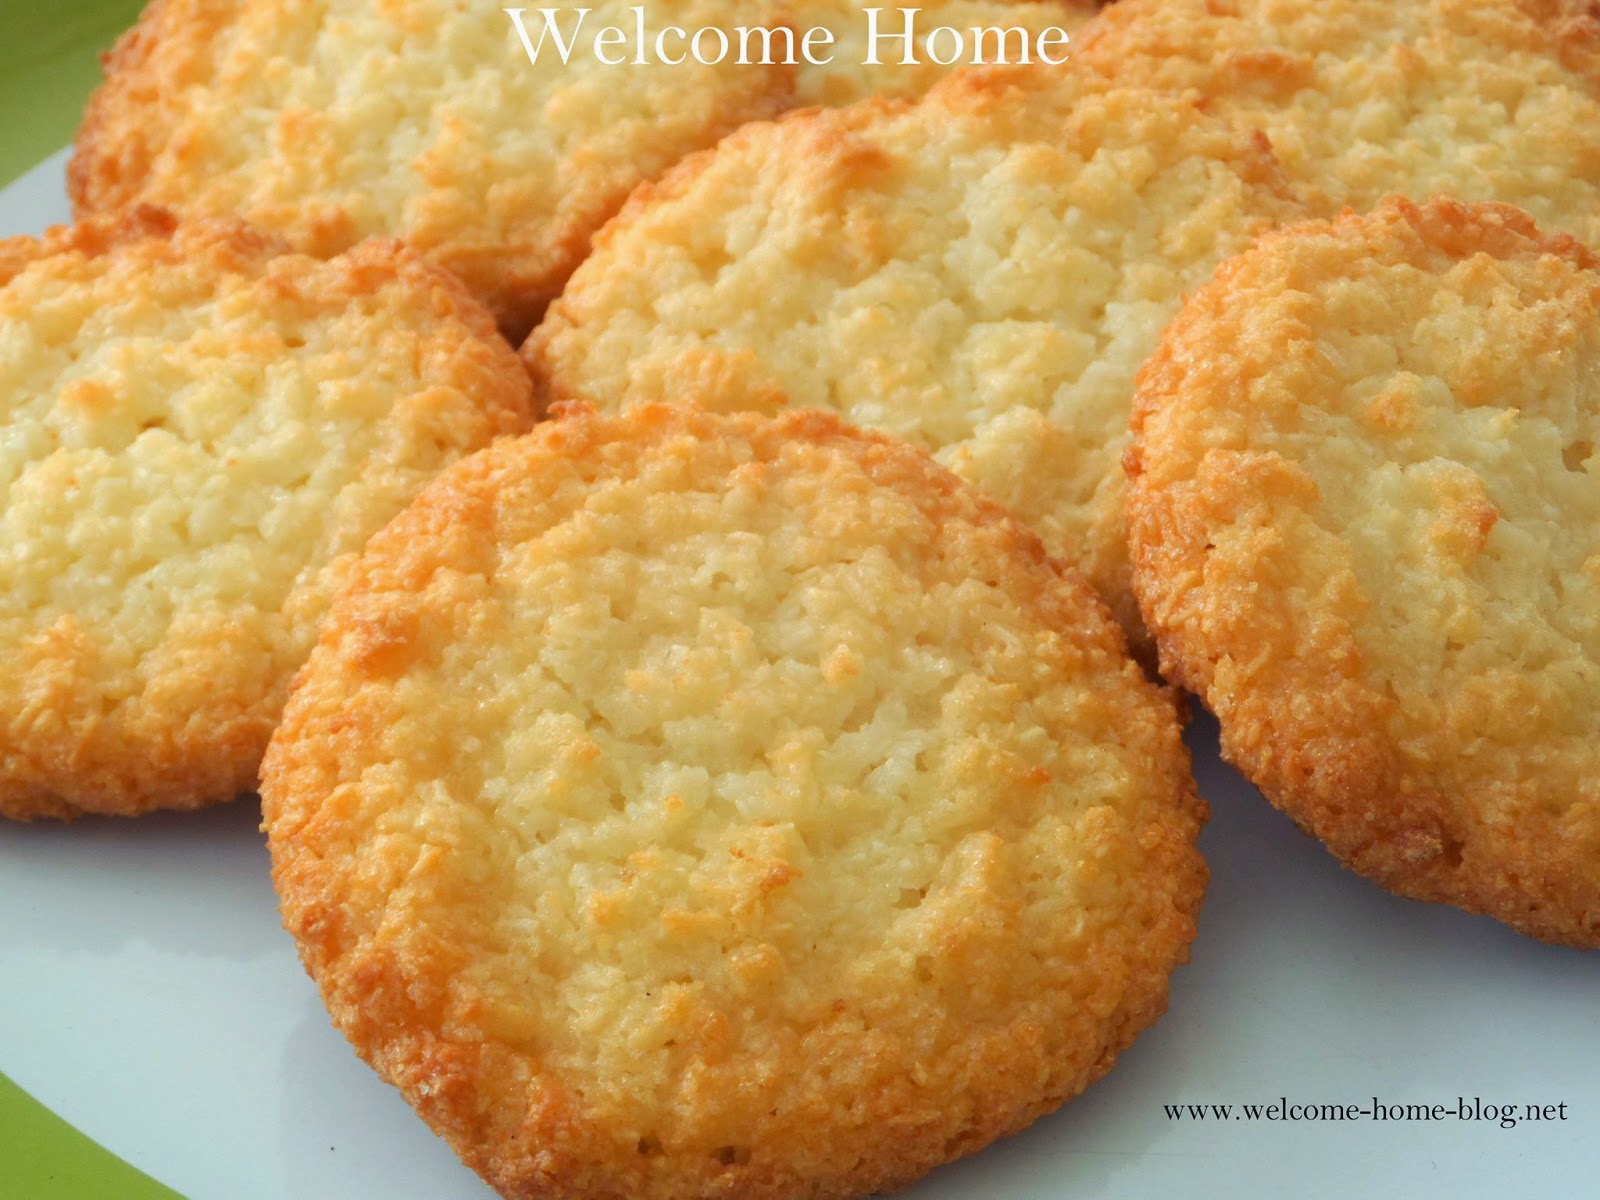 Welcome Home Blog: Coconut Cookies